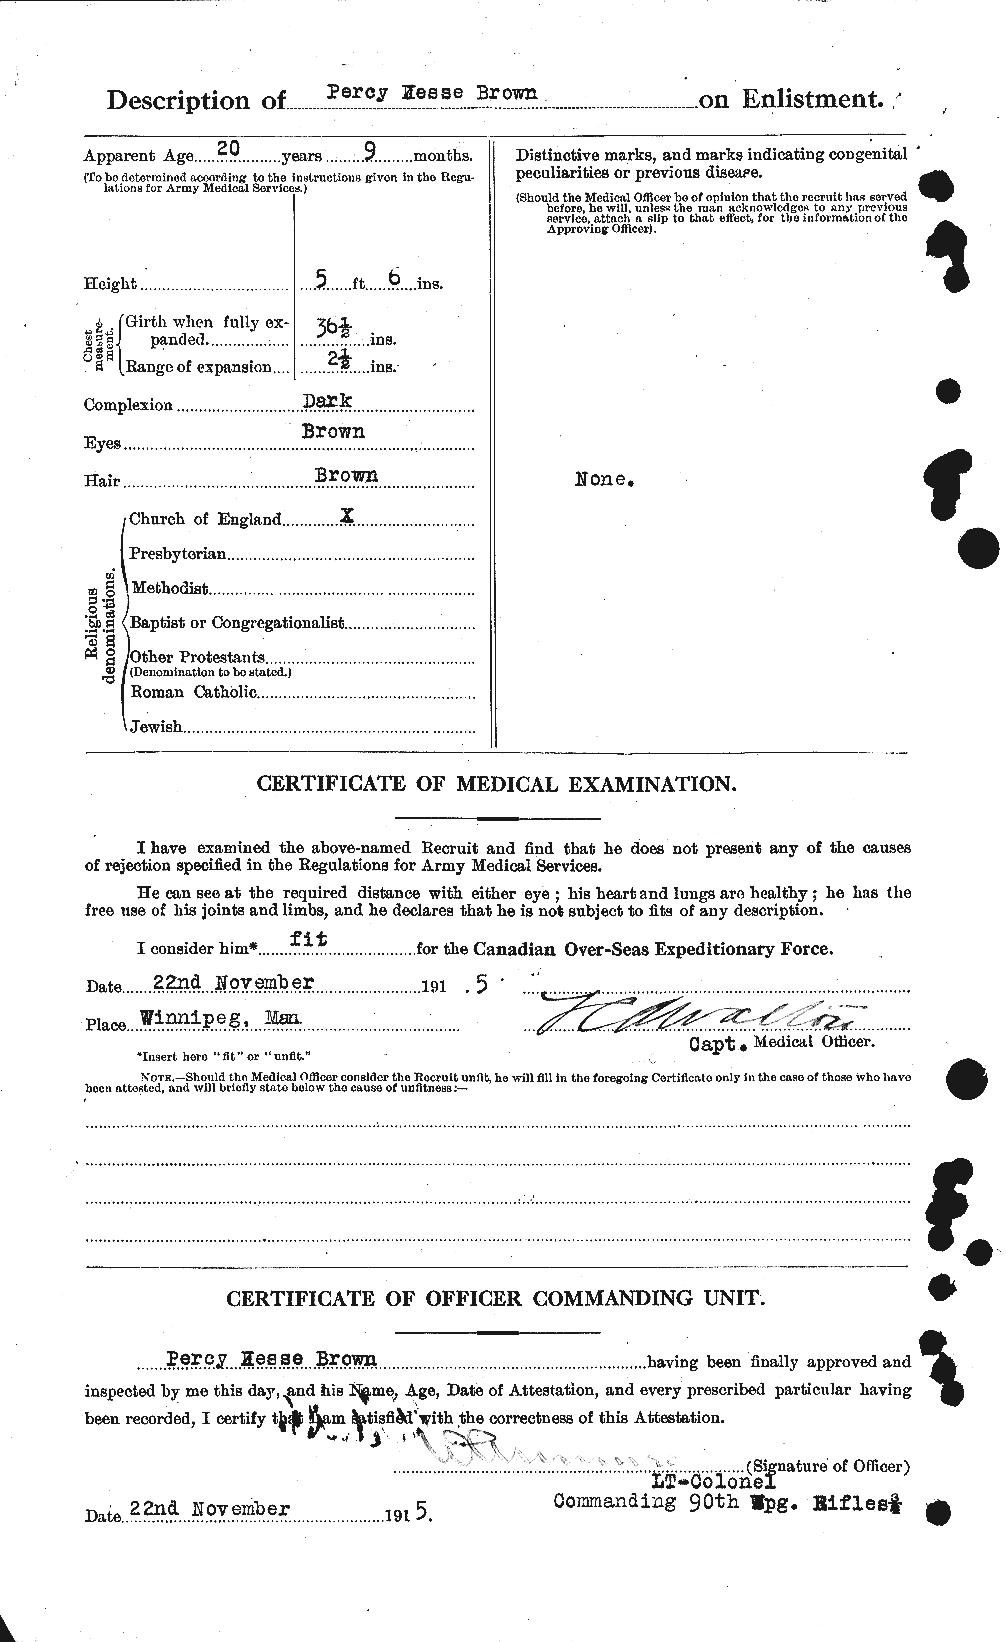 Personnel Records of the First World War - CEF 267171b